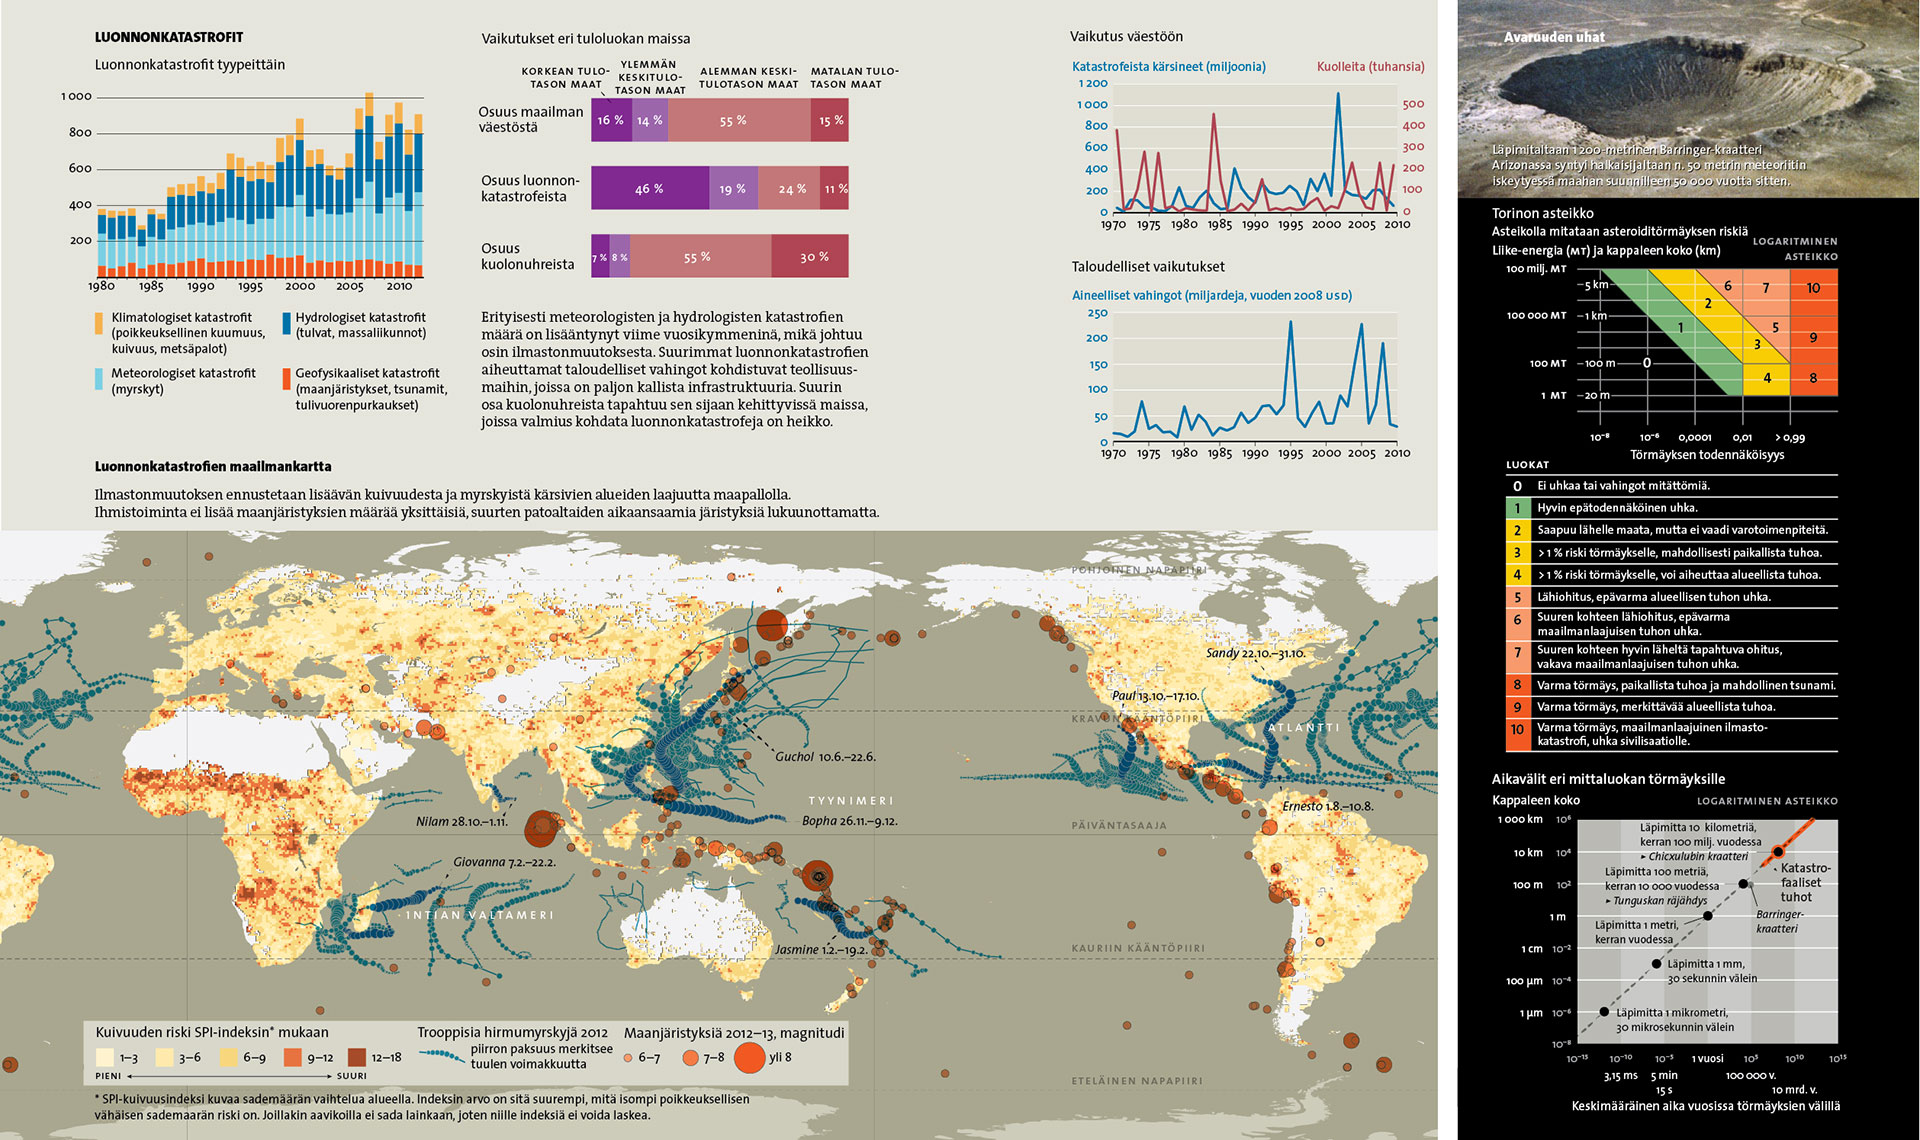 Spread with infographics about various natural disasters.